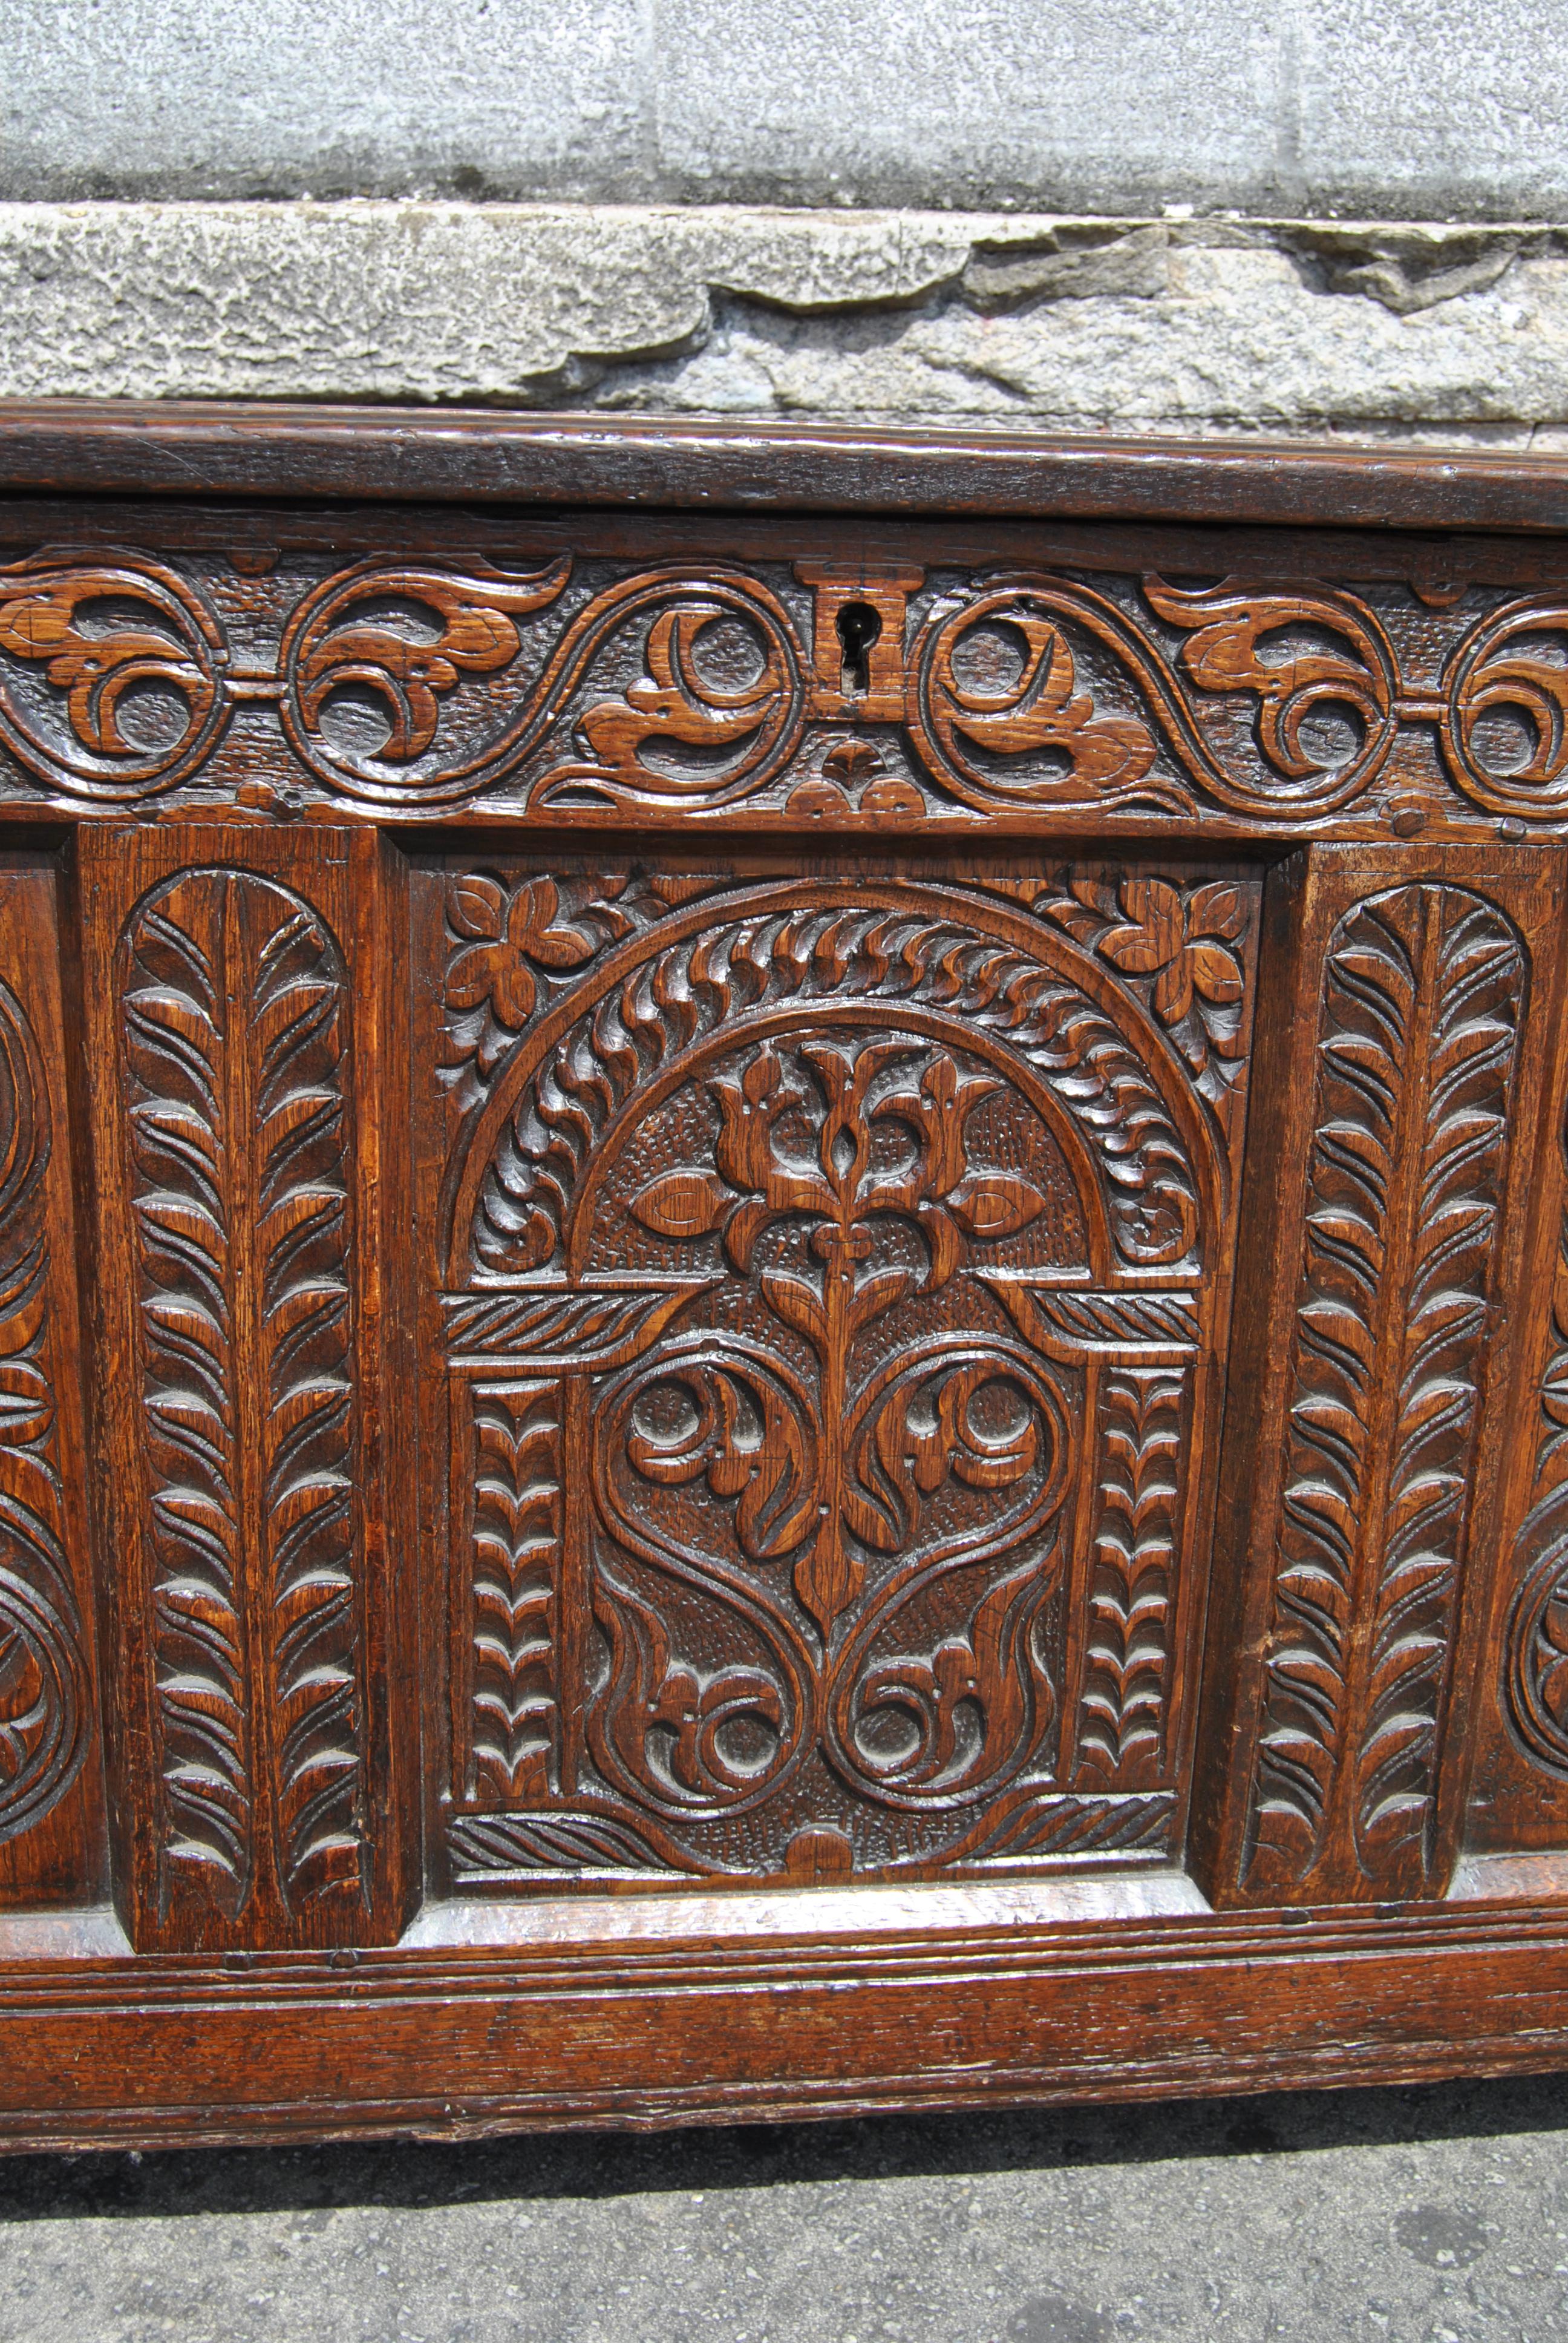 Elizabethan Early 18th Century English Carved Oak Blanket Chest / Coffer